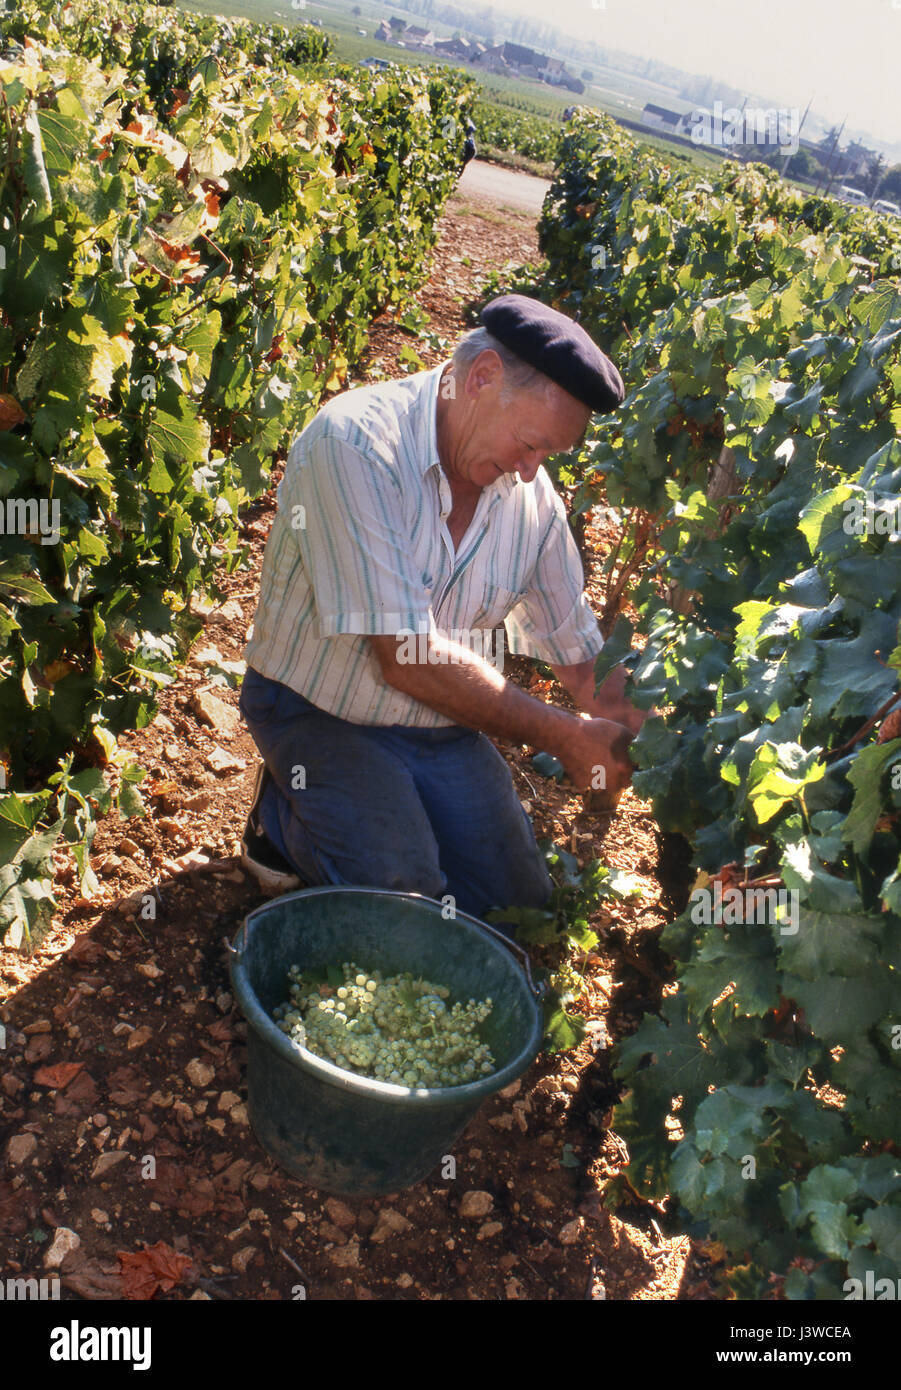 CHARACTER FRENCH GRAPE HARVEST Monsieur Bibi with beret in Blanchot-Dessous vineyard of Michel Colin-Deleger, Chassagne-Montrachet, Côte d'Or, France. Stock Photo